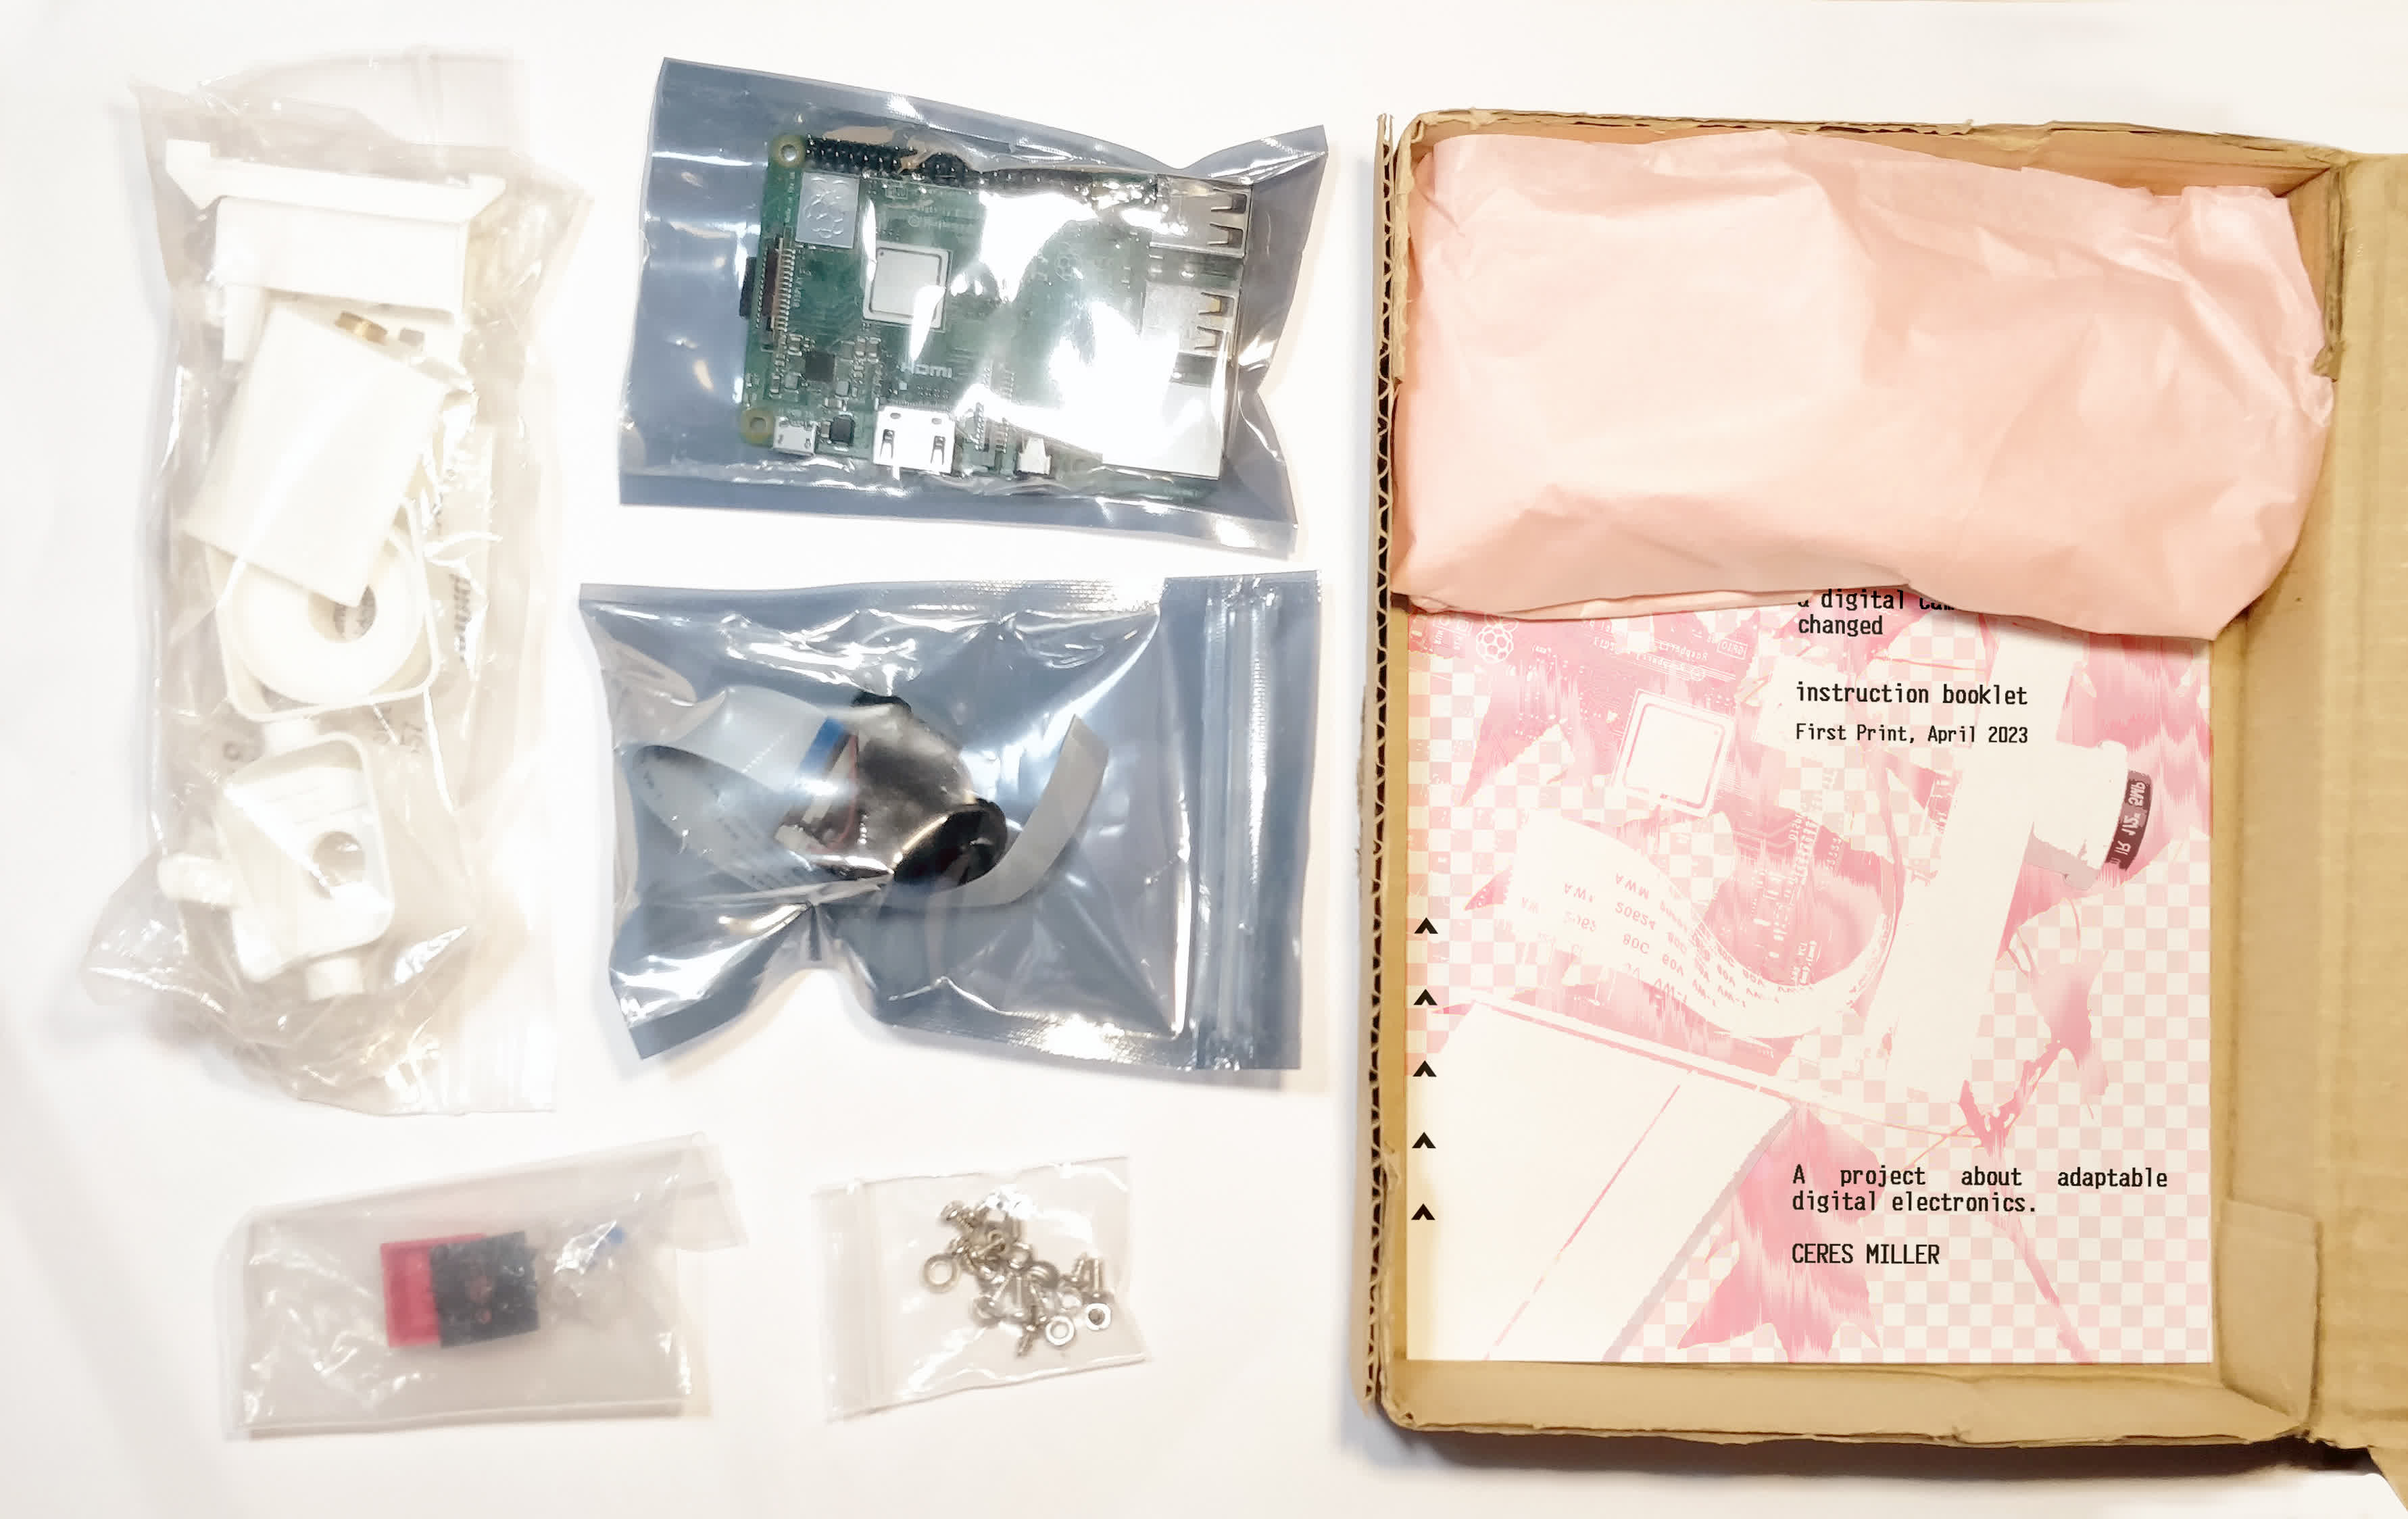 the packaged camera, showing the brass parts wrapped in pink tissue paper, and the instruction booklet. The packaging is meant for postage, and is A5 size x 40mm